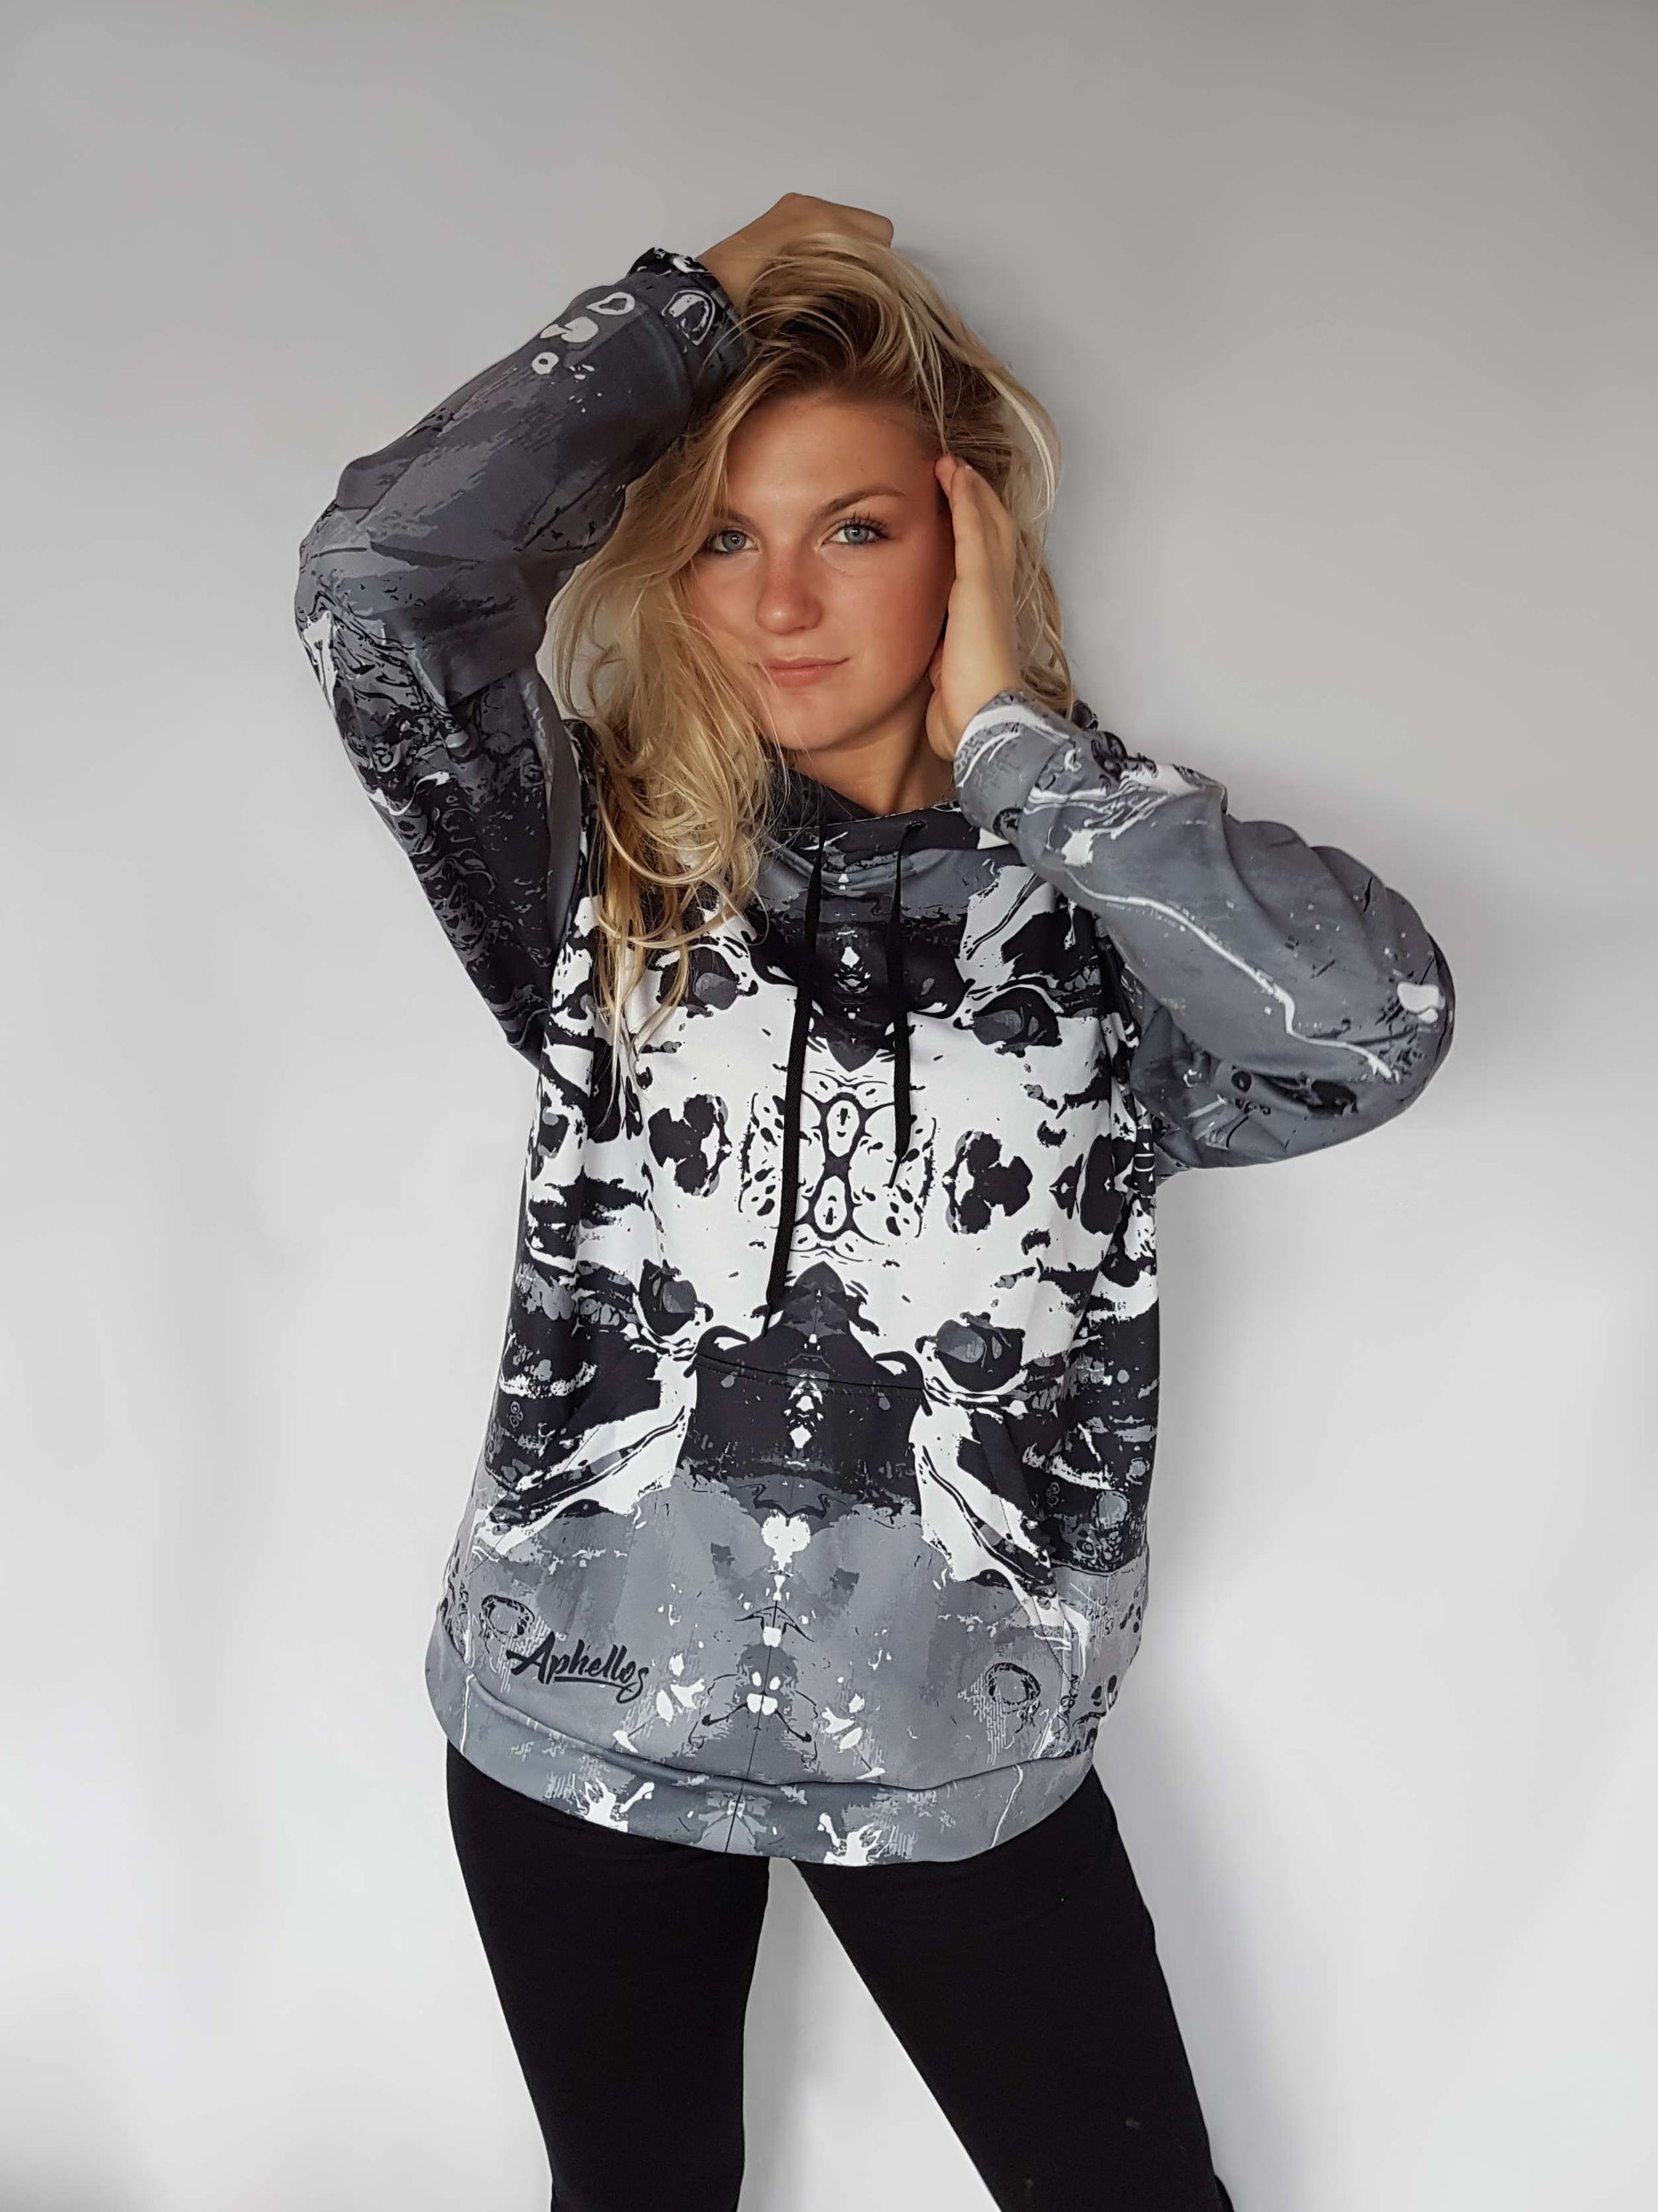 black and white lion hooded sweatshirt with an image that looks like a Rorschach inkblot test on the front